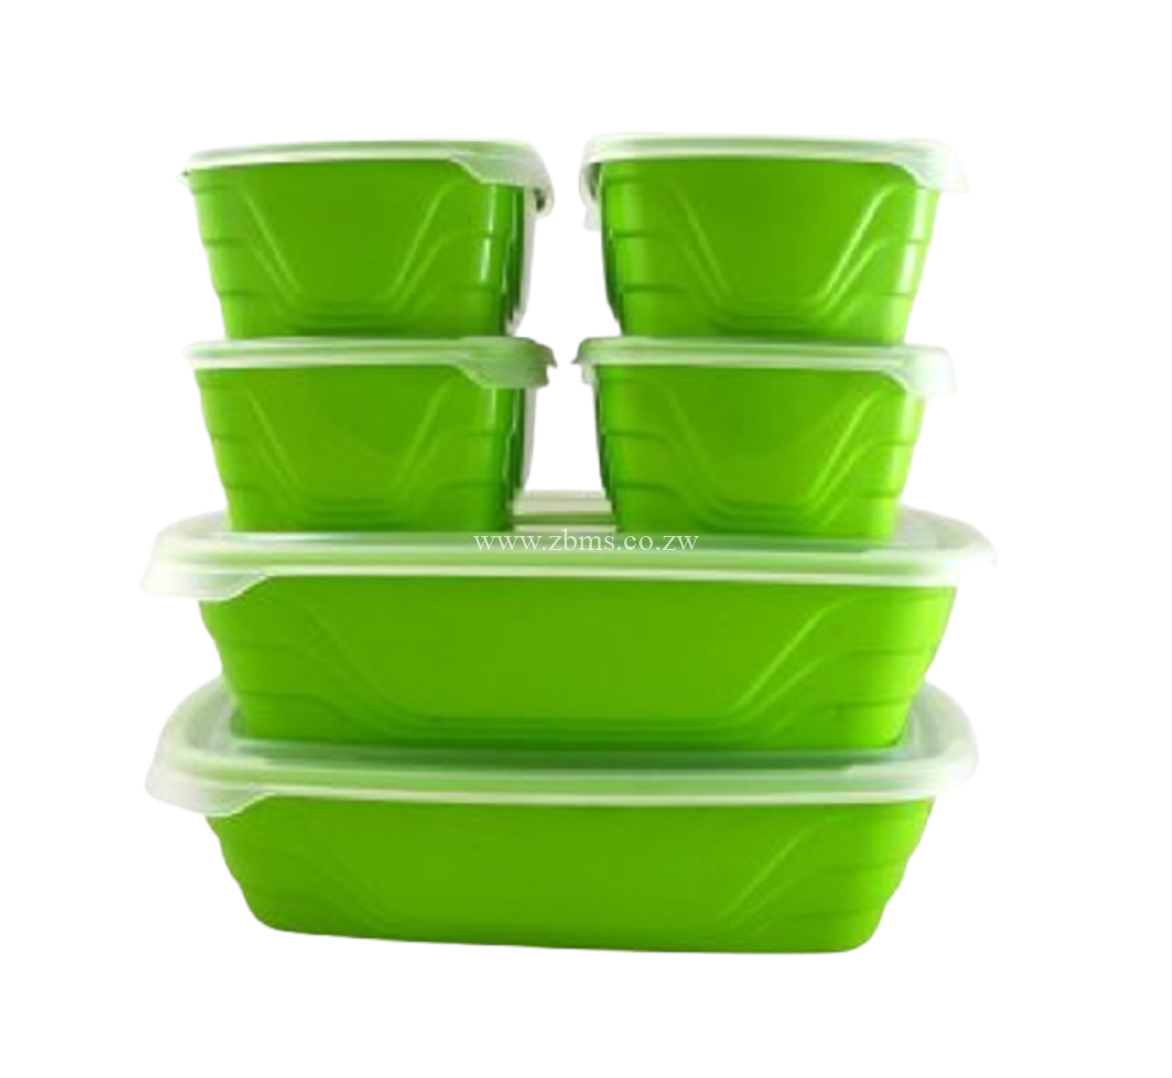 12pc Otima container set for food storage